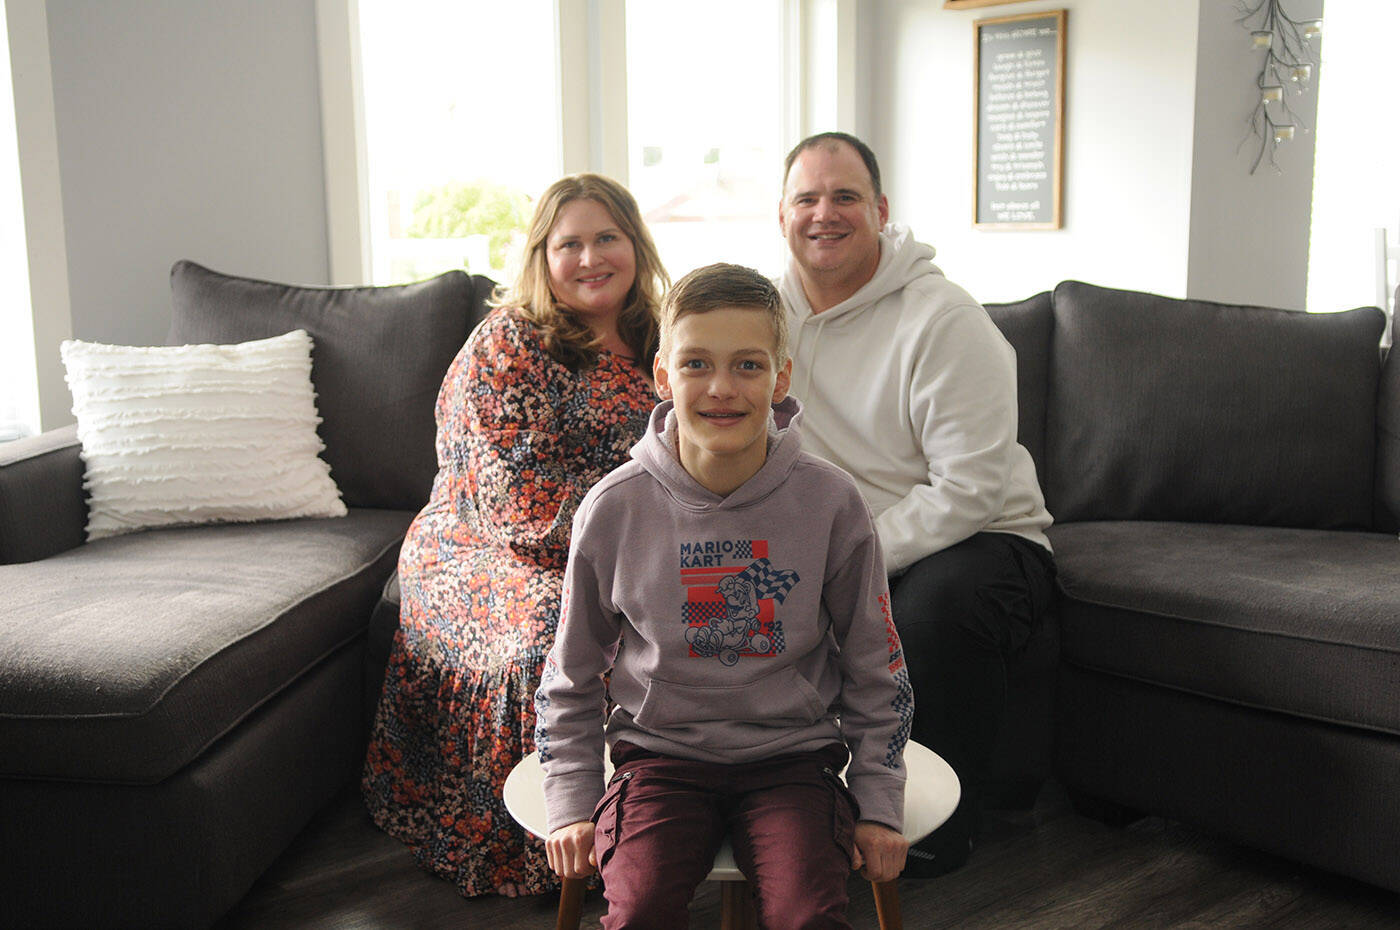 Thirteen-year-old Madden Wicker-Vriend, seen here with his parents Eryn and Jesse on May 27, 2022, is on dialysis at home in Chilliwack and is looking for a living kidney donor. (Jenna Hauck/ Chilliwack Progress)